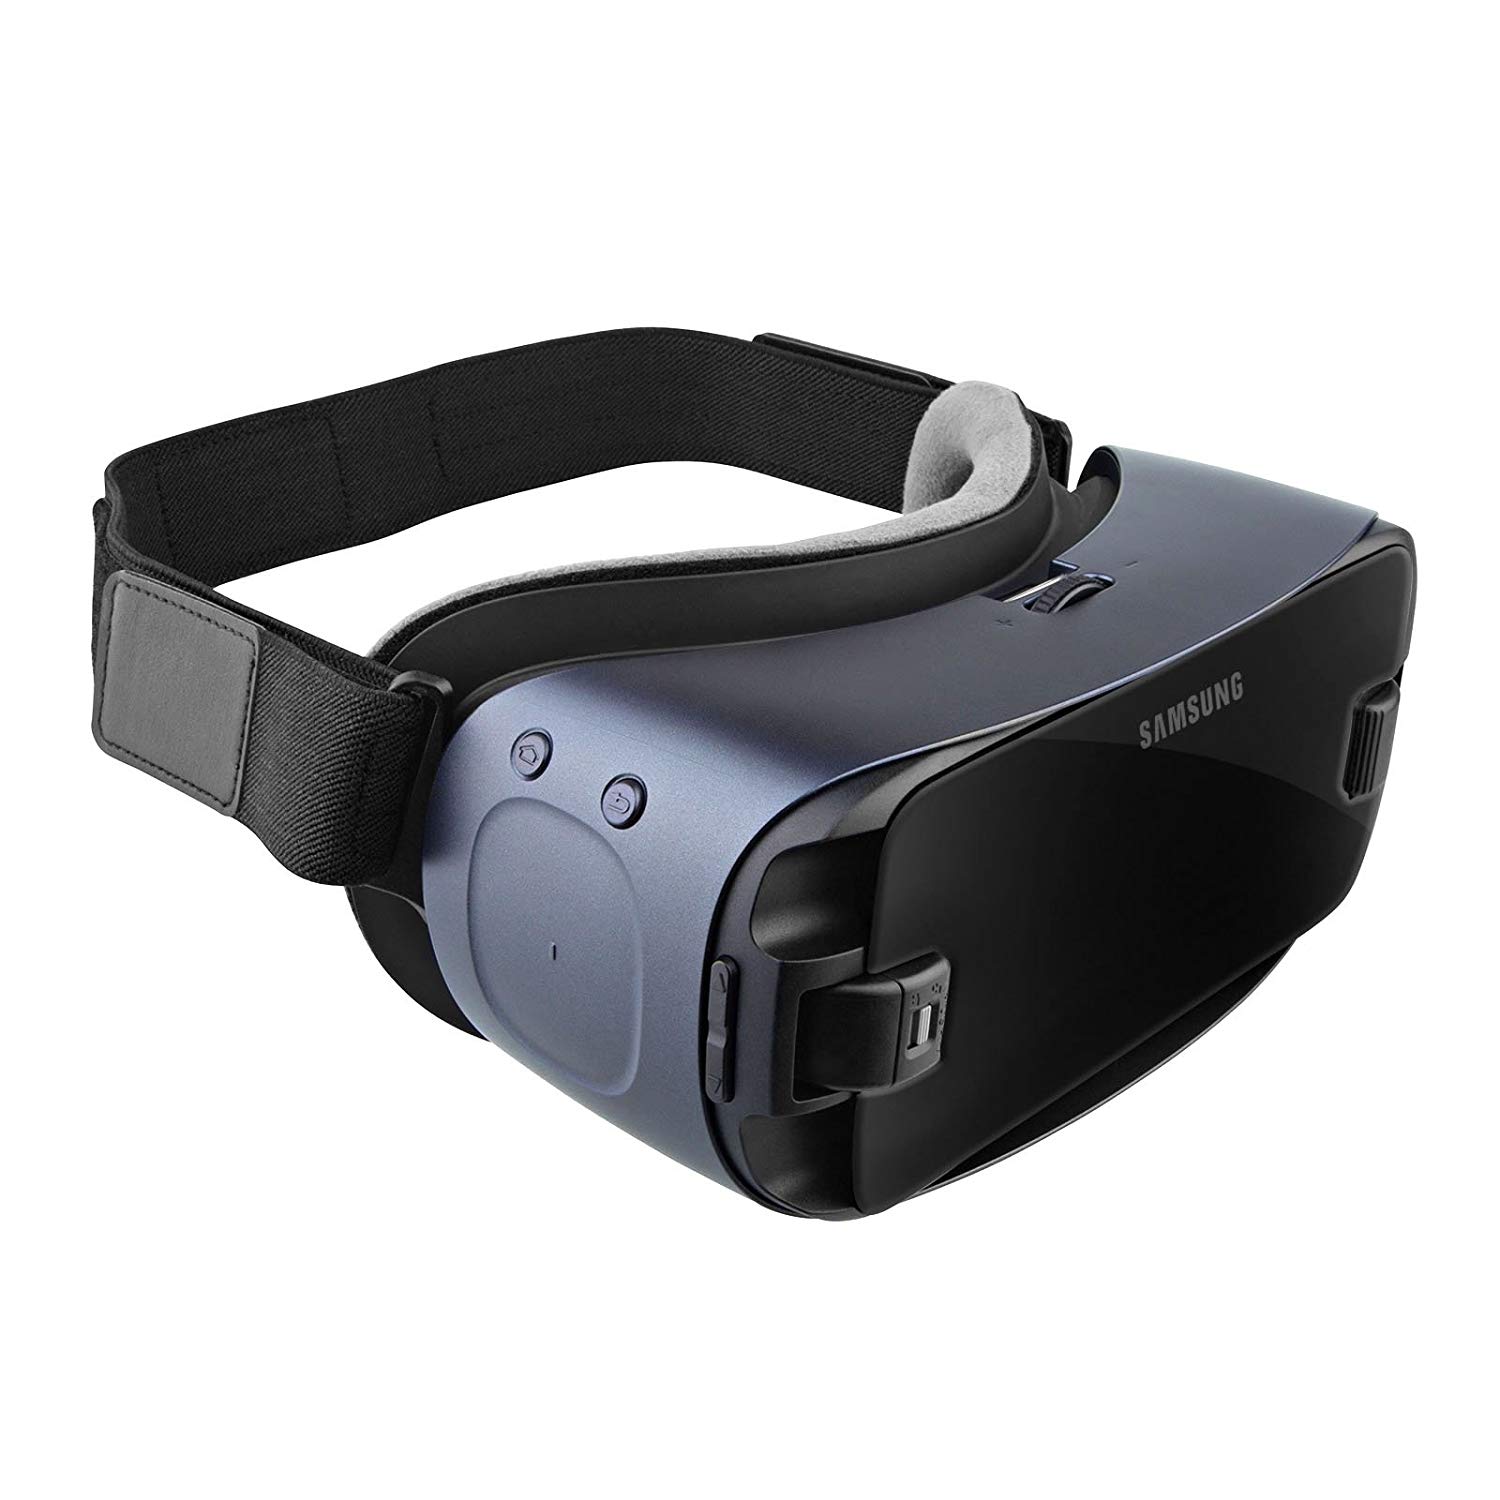 Samsung VR Gear (Note: Discontinued)